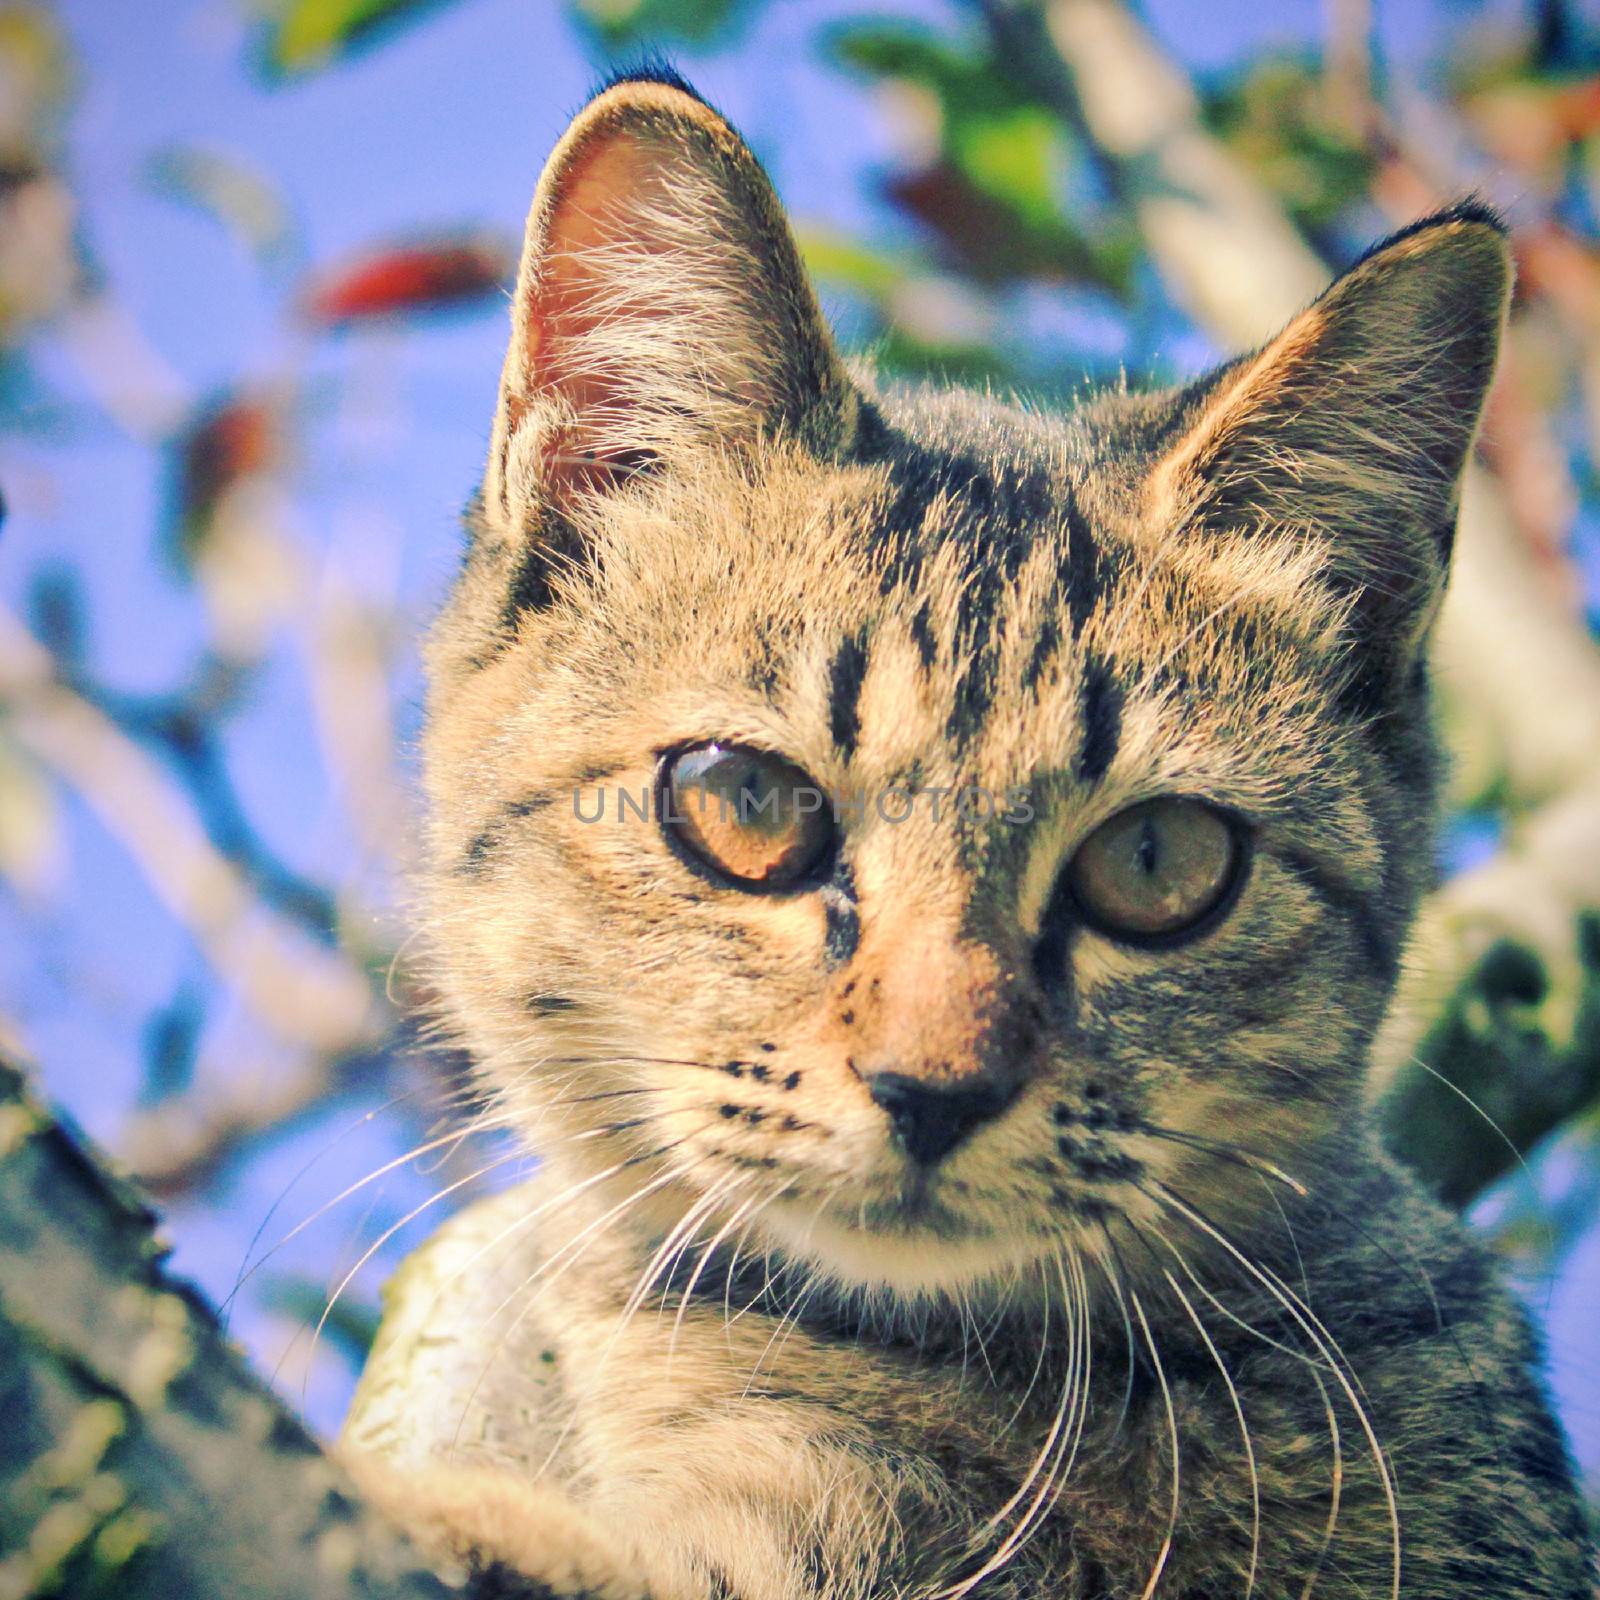 Cute cat on the tree with retro filter effect by nuchylee